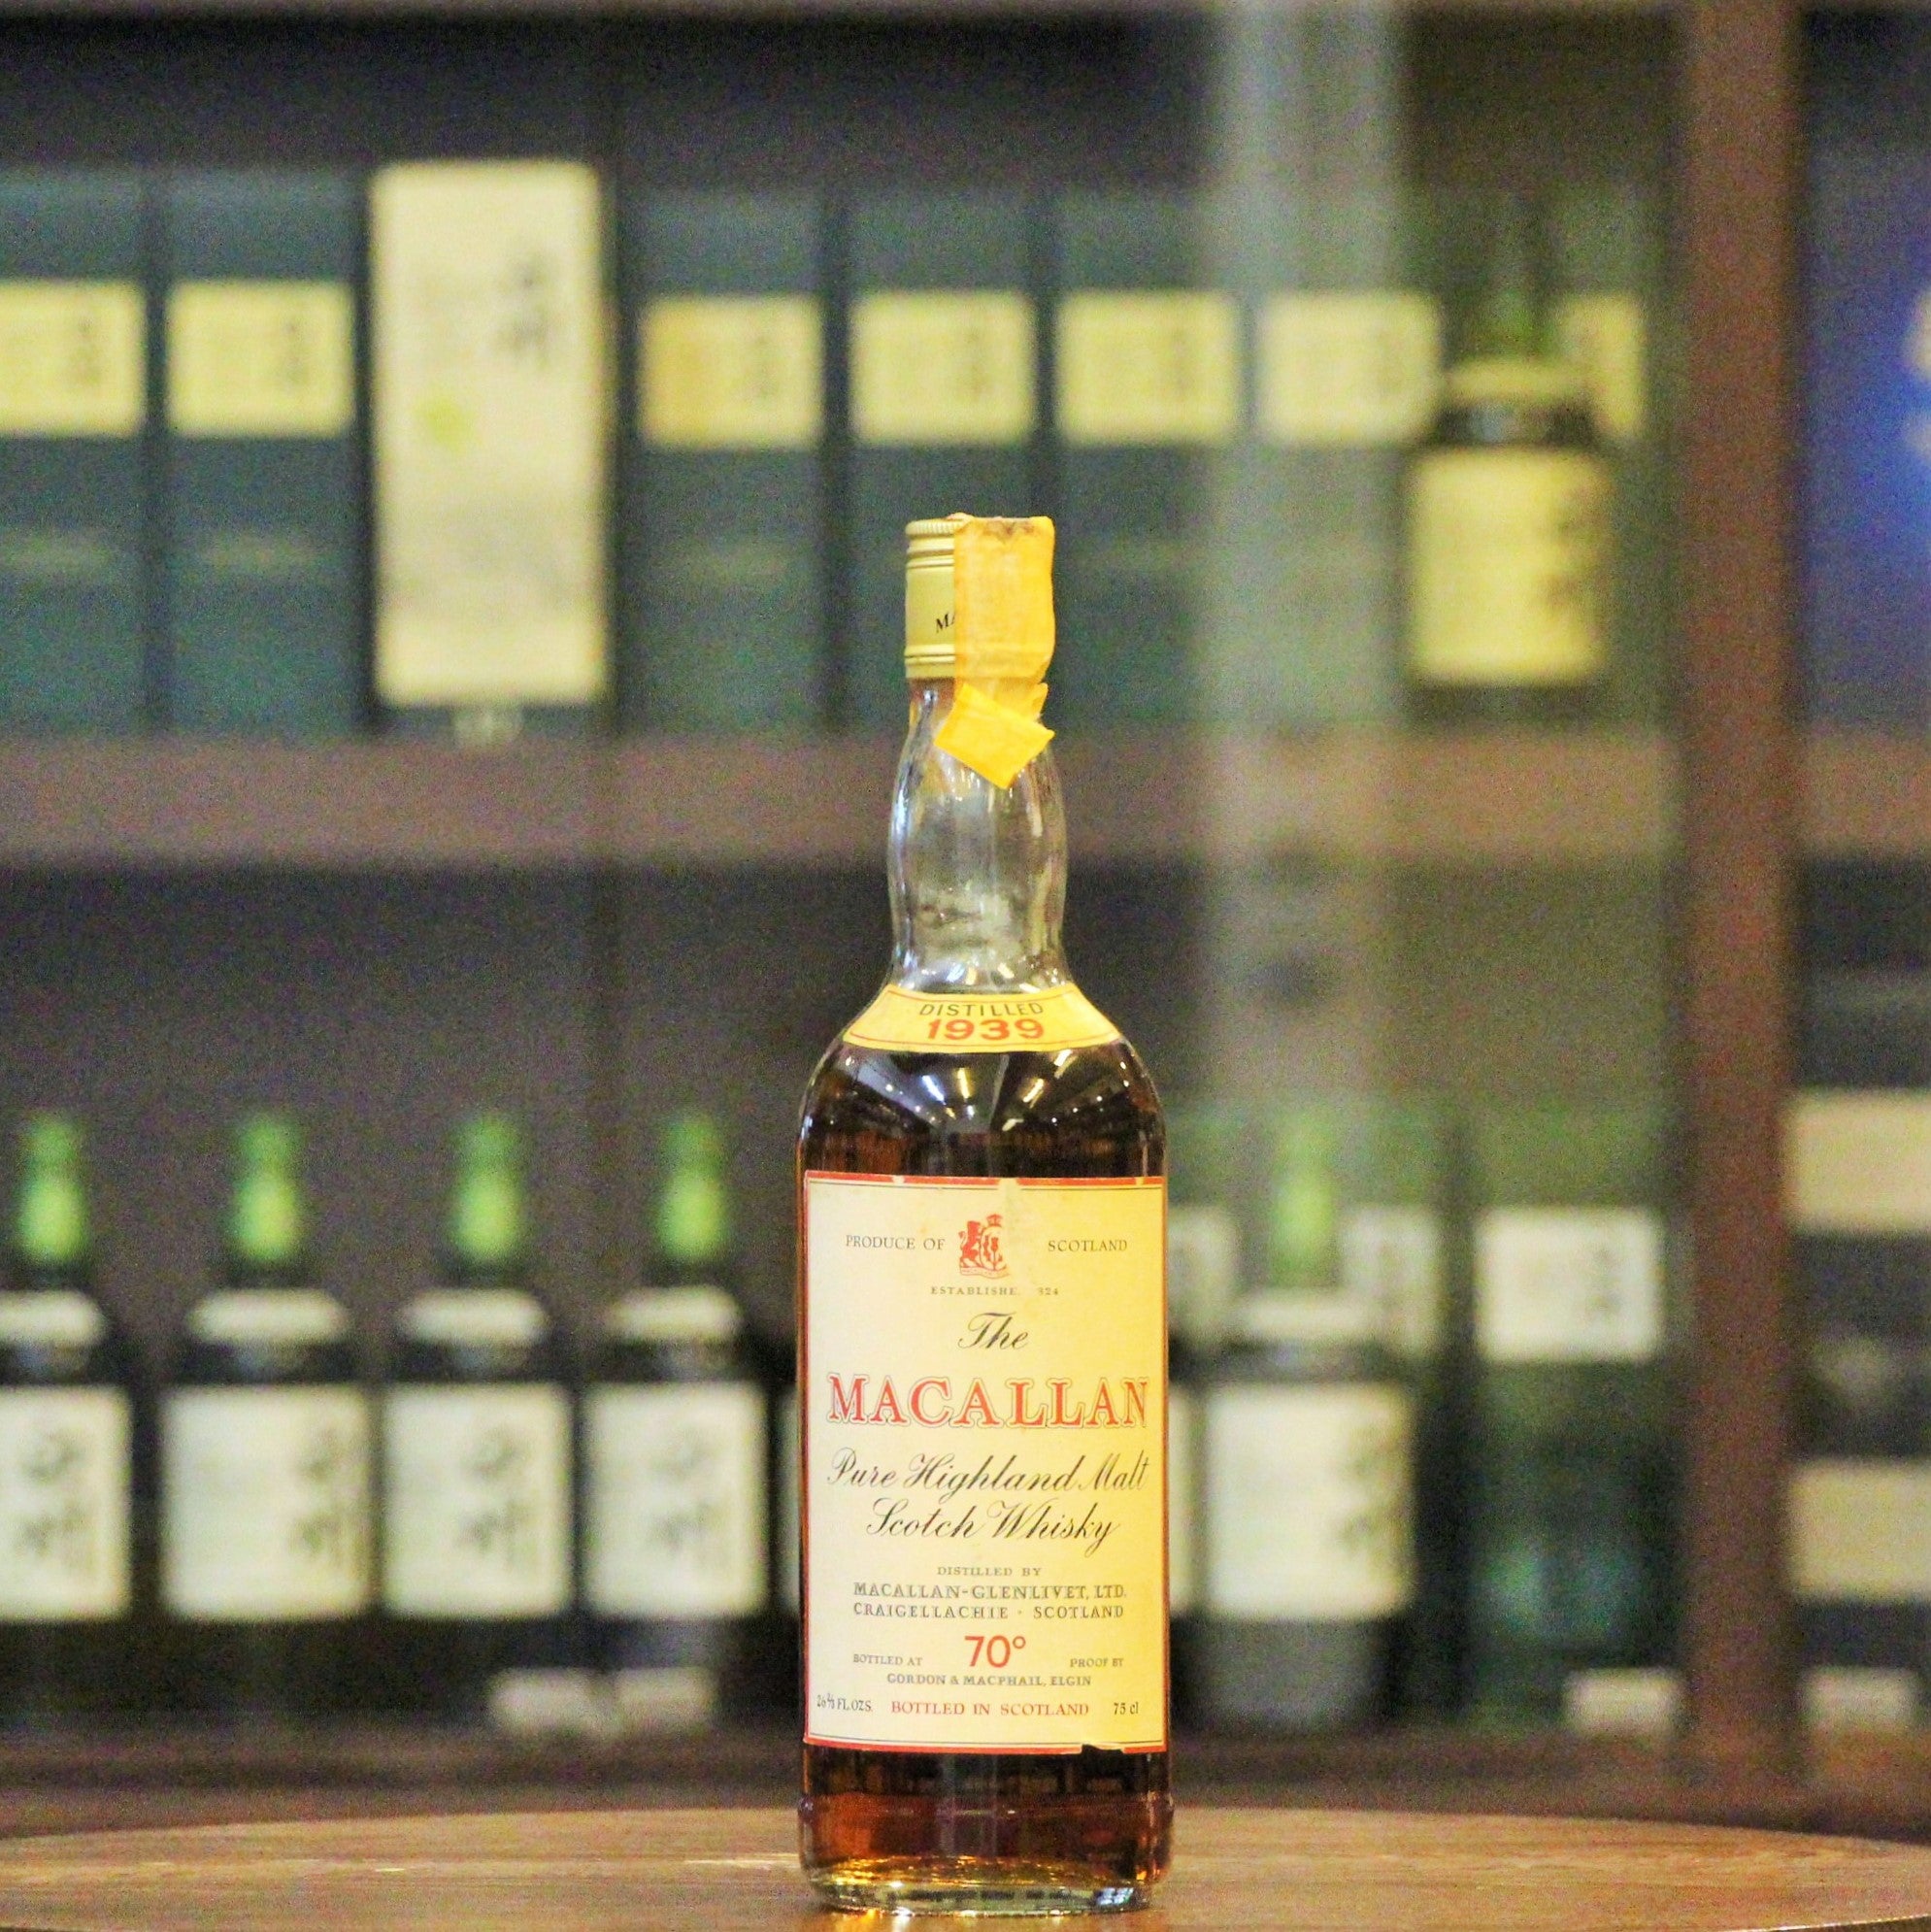 A Rare & Vintage Macallan-Glenlivet distilled in 1939 and bottled by Gordon & MacPhail. An incredible and rare pre-war Macallan likely to have been bottled in the 1970s. As a key ingredient for many blends through most of the 20th century, Macallan had licensed its bottling to Campbell, Hope & King and Gordon & MacPhail in the 1960s and 1970s and which continue to be some of the most collectible bottlings.